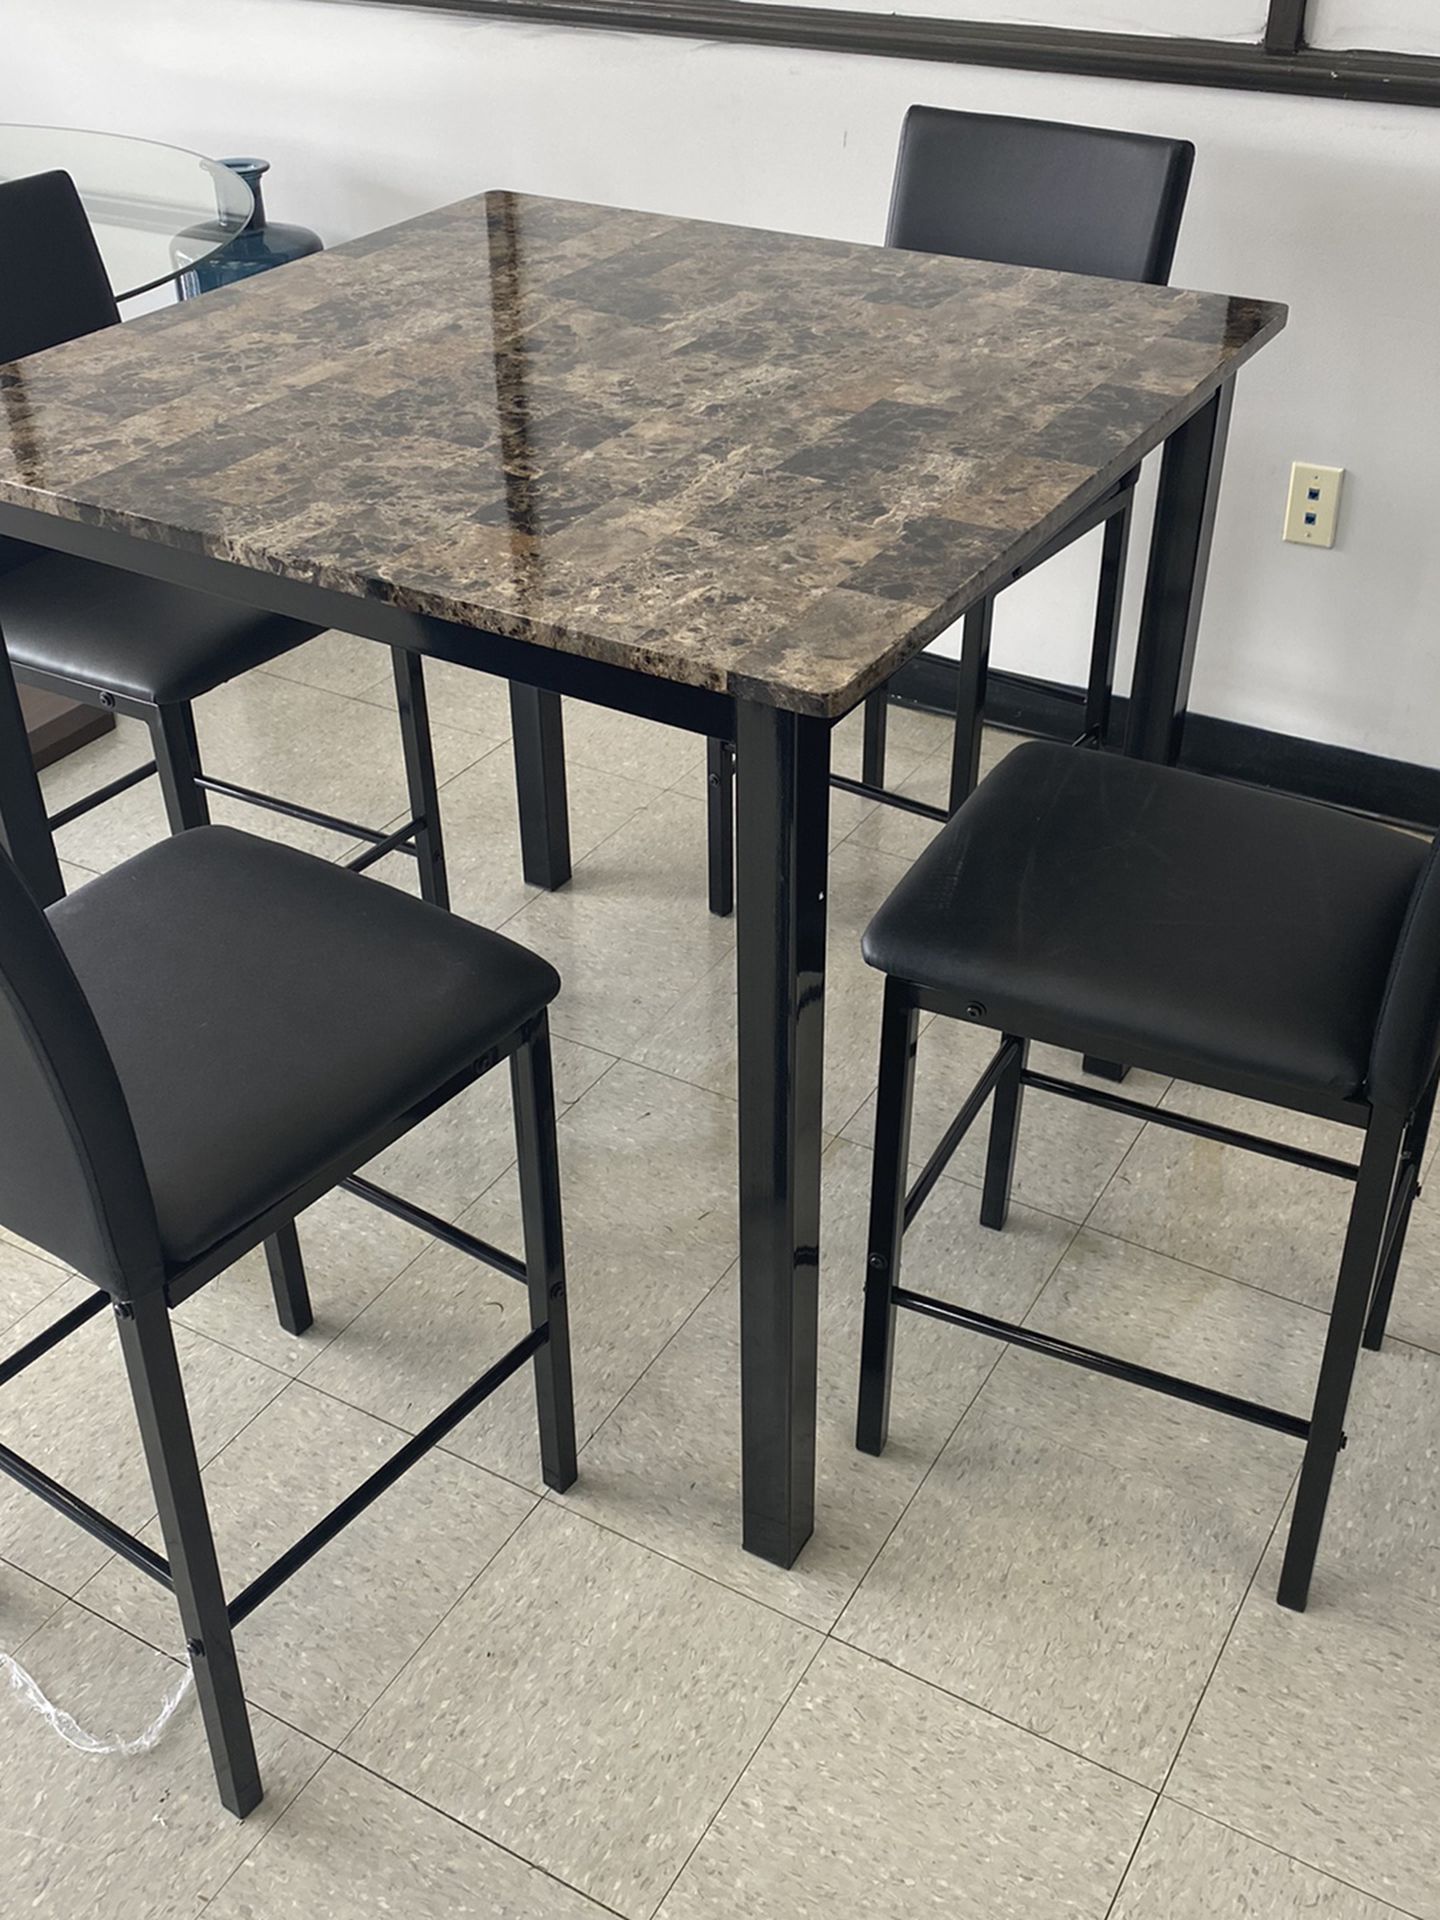 4 PIECE PUB STYLE DINING TABLE SET